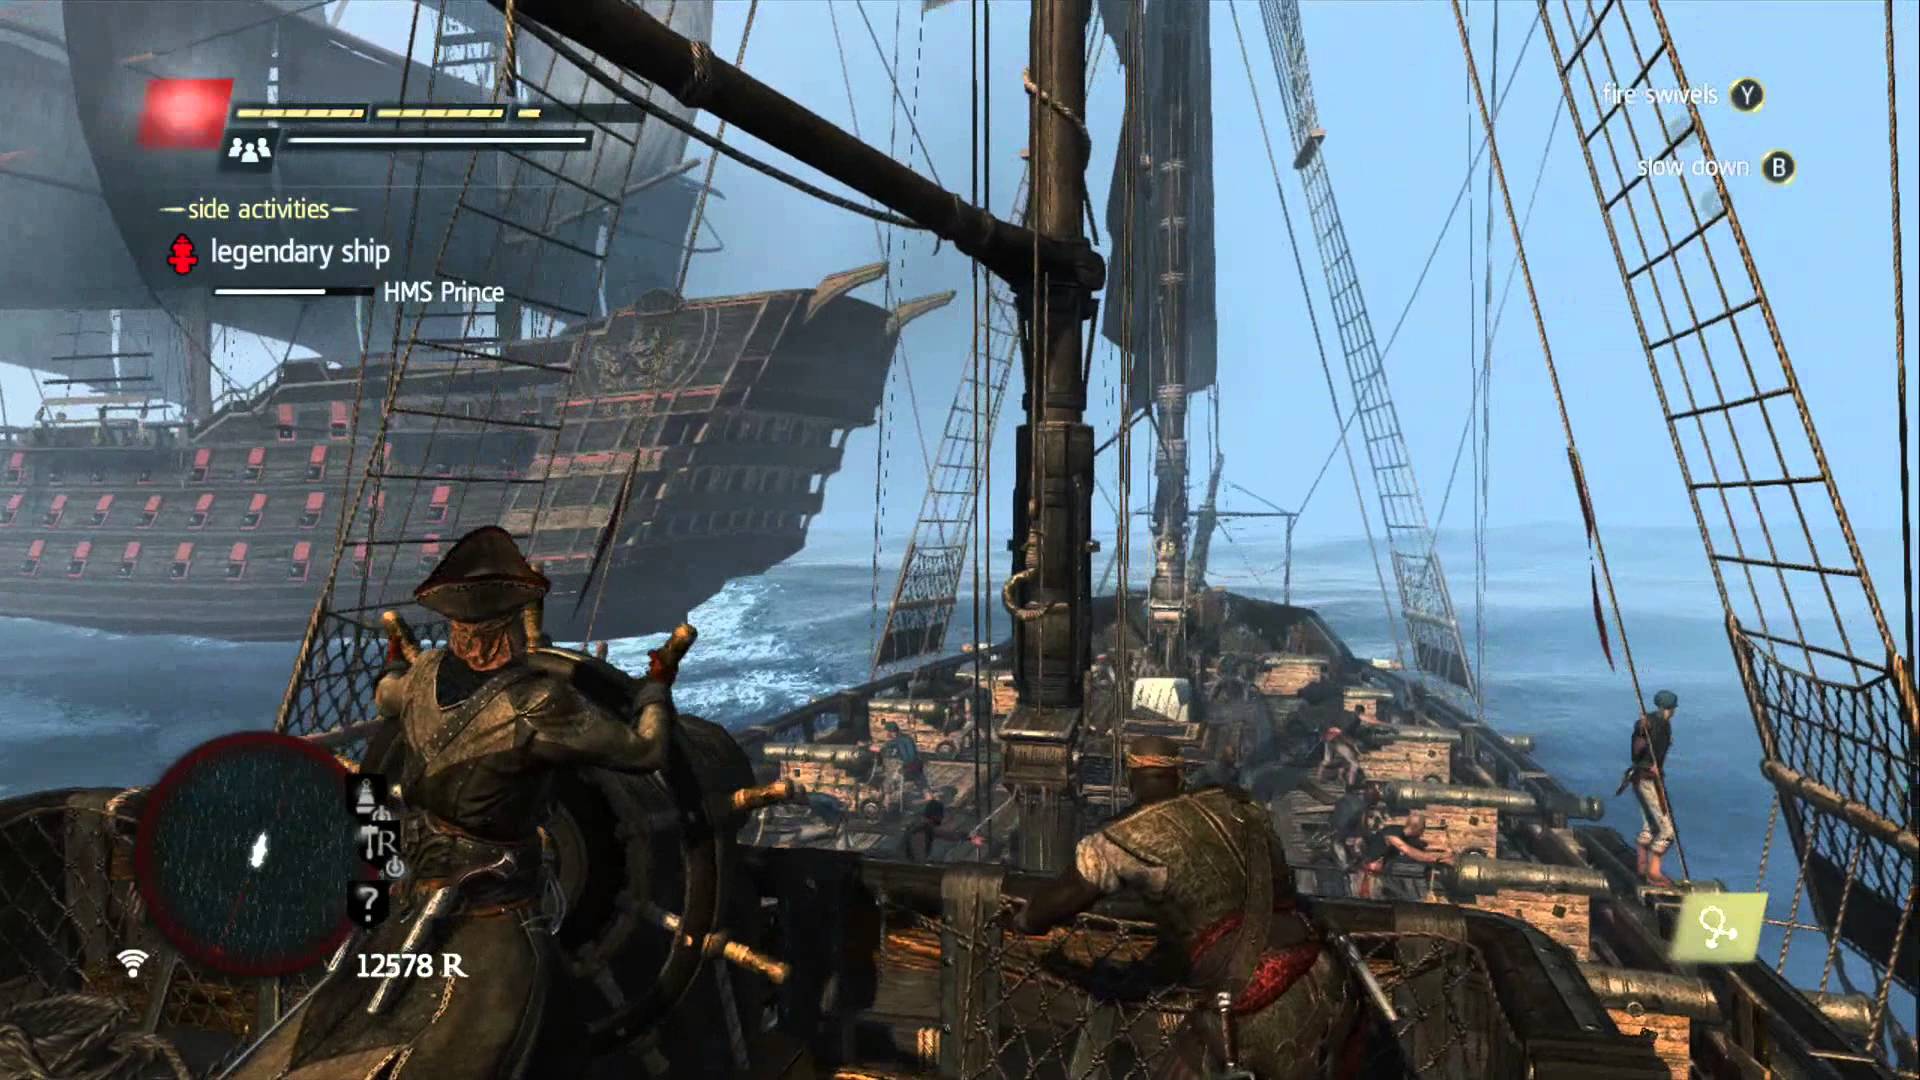 Assassin S Creed 4 Black Flag Ship Combat Wallpapers Top Free